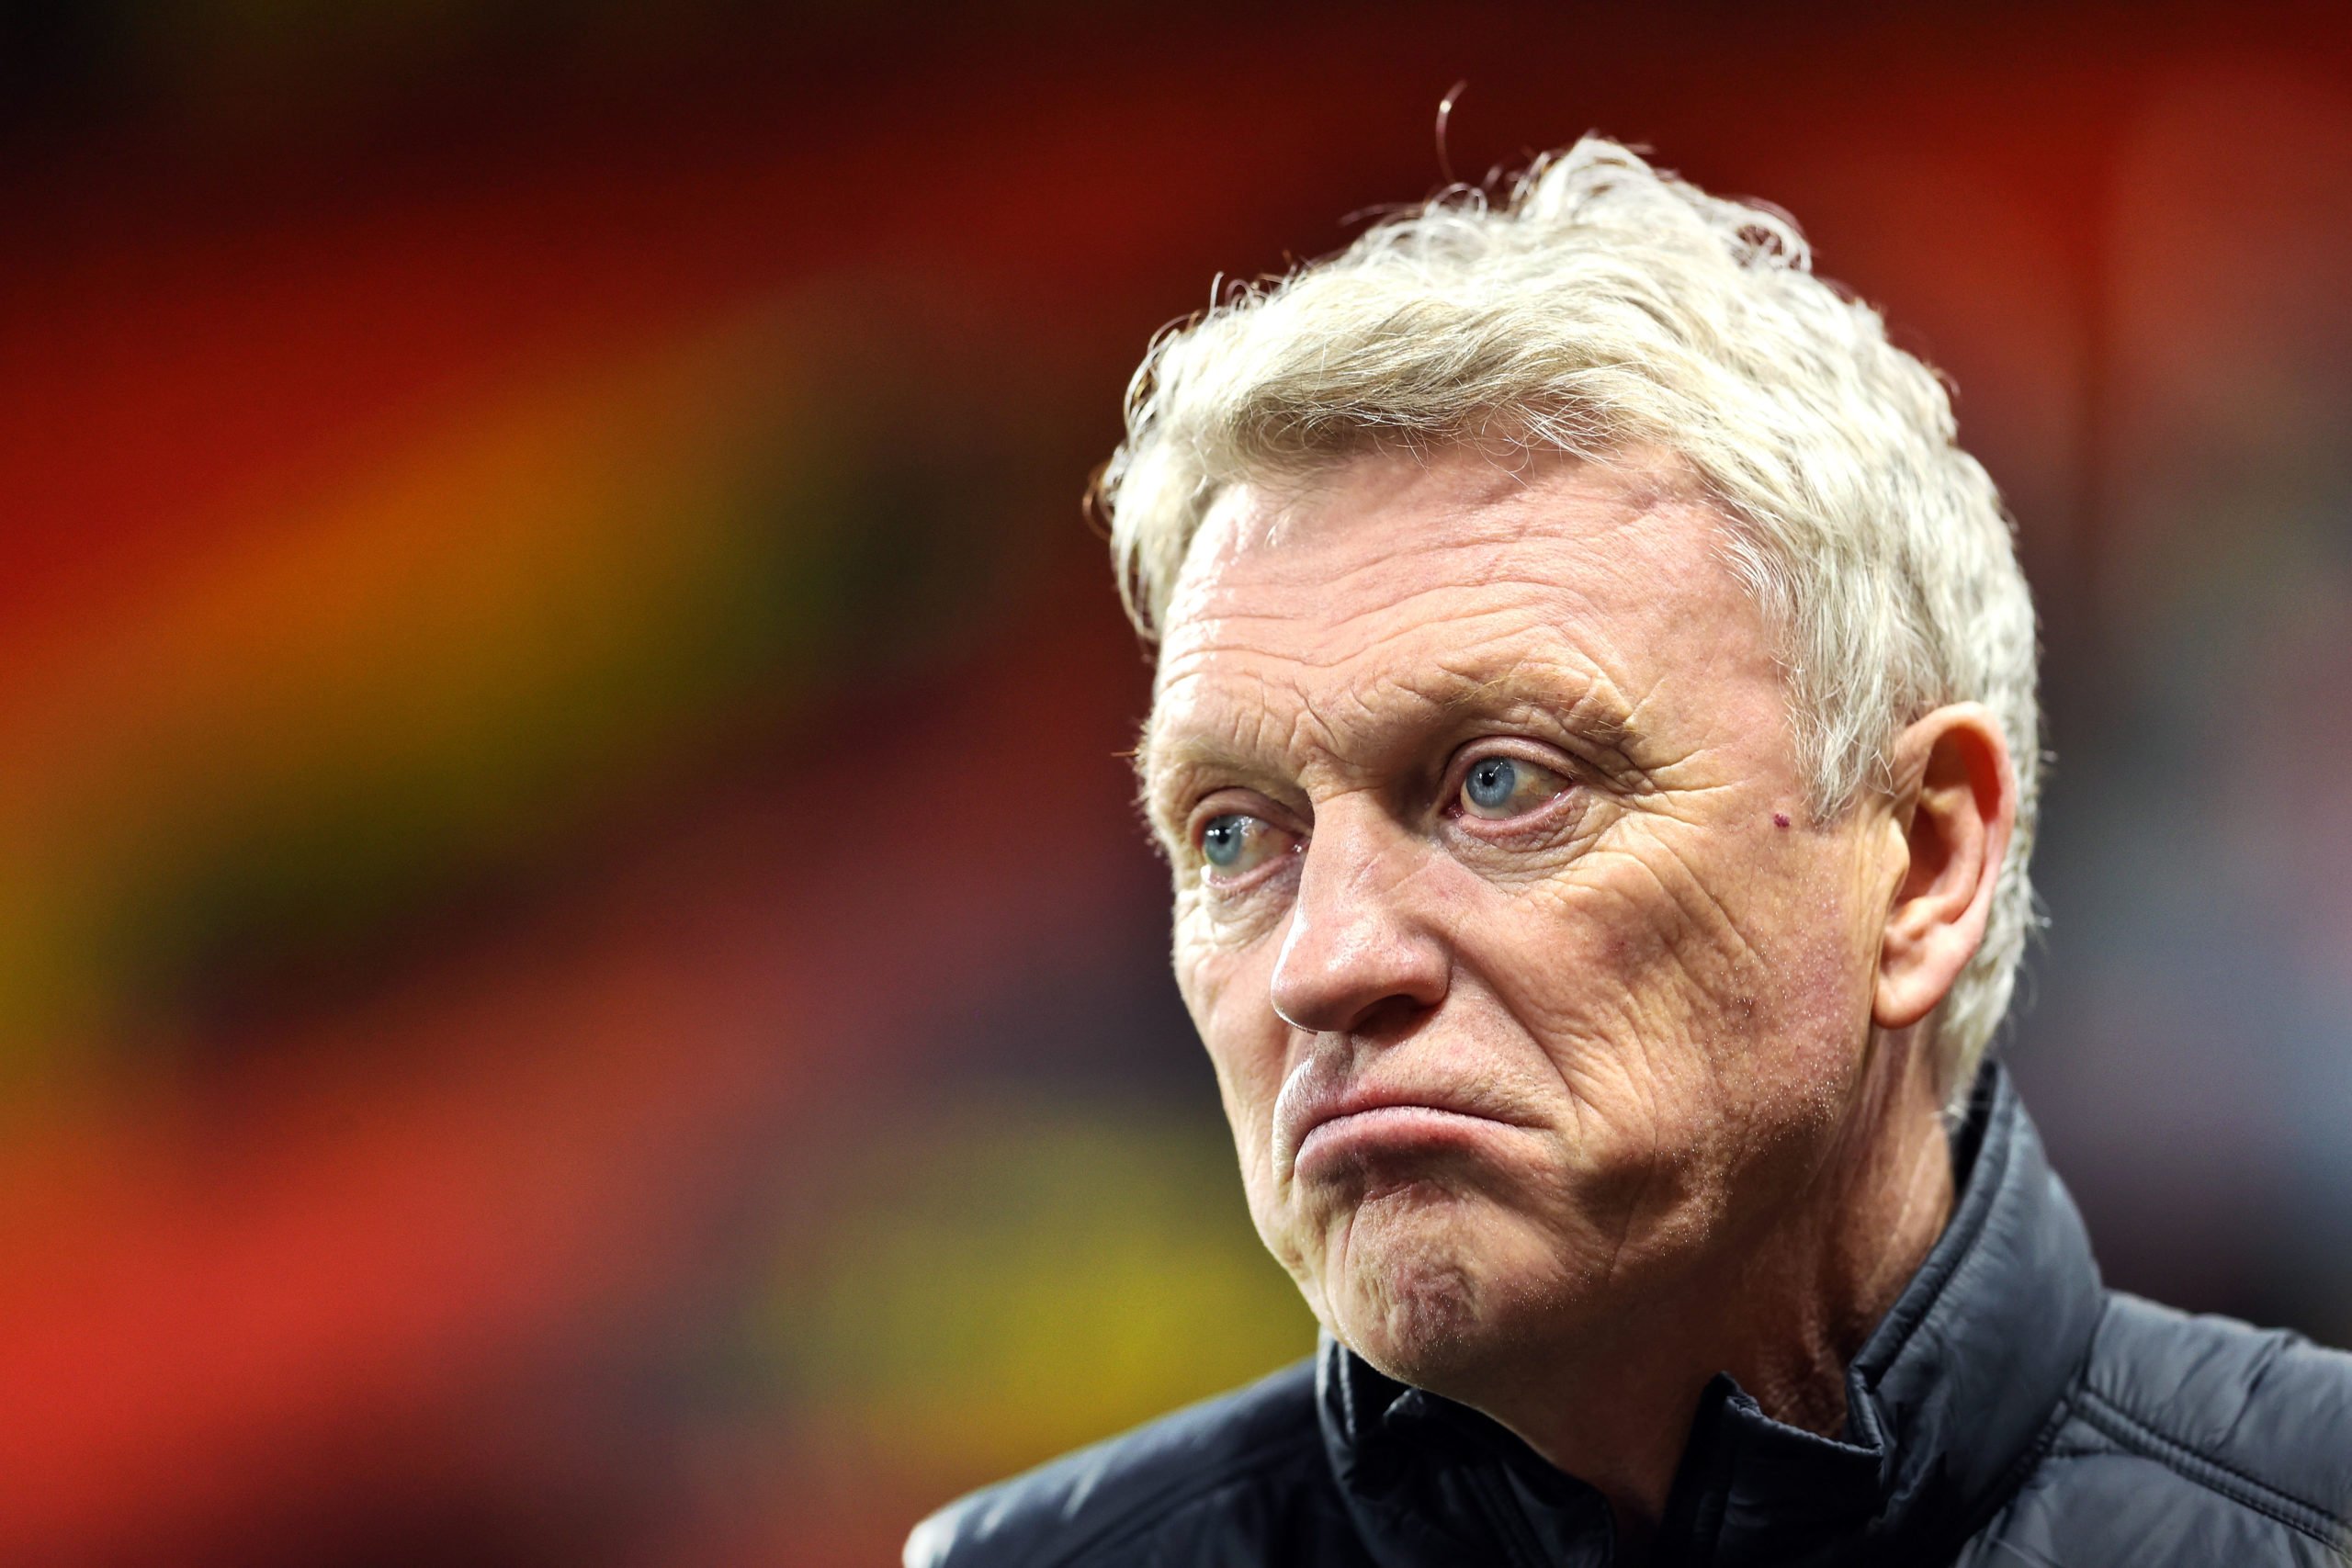 David Moyes makes surprise claim about West Ham advantage over Watford which flies in the face of convention